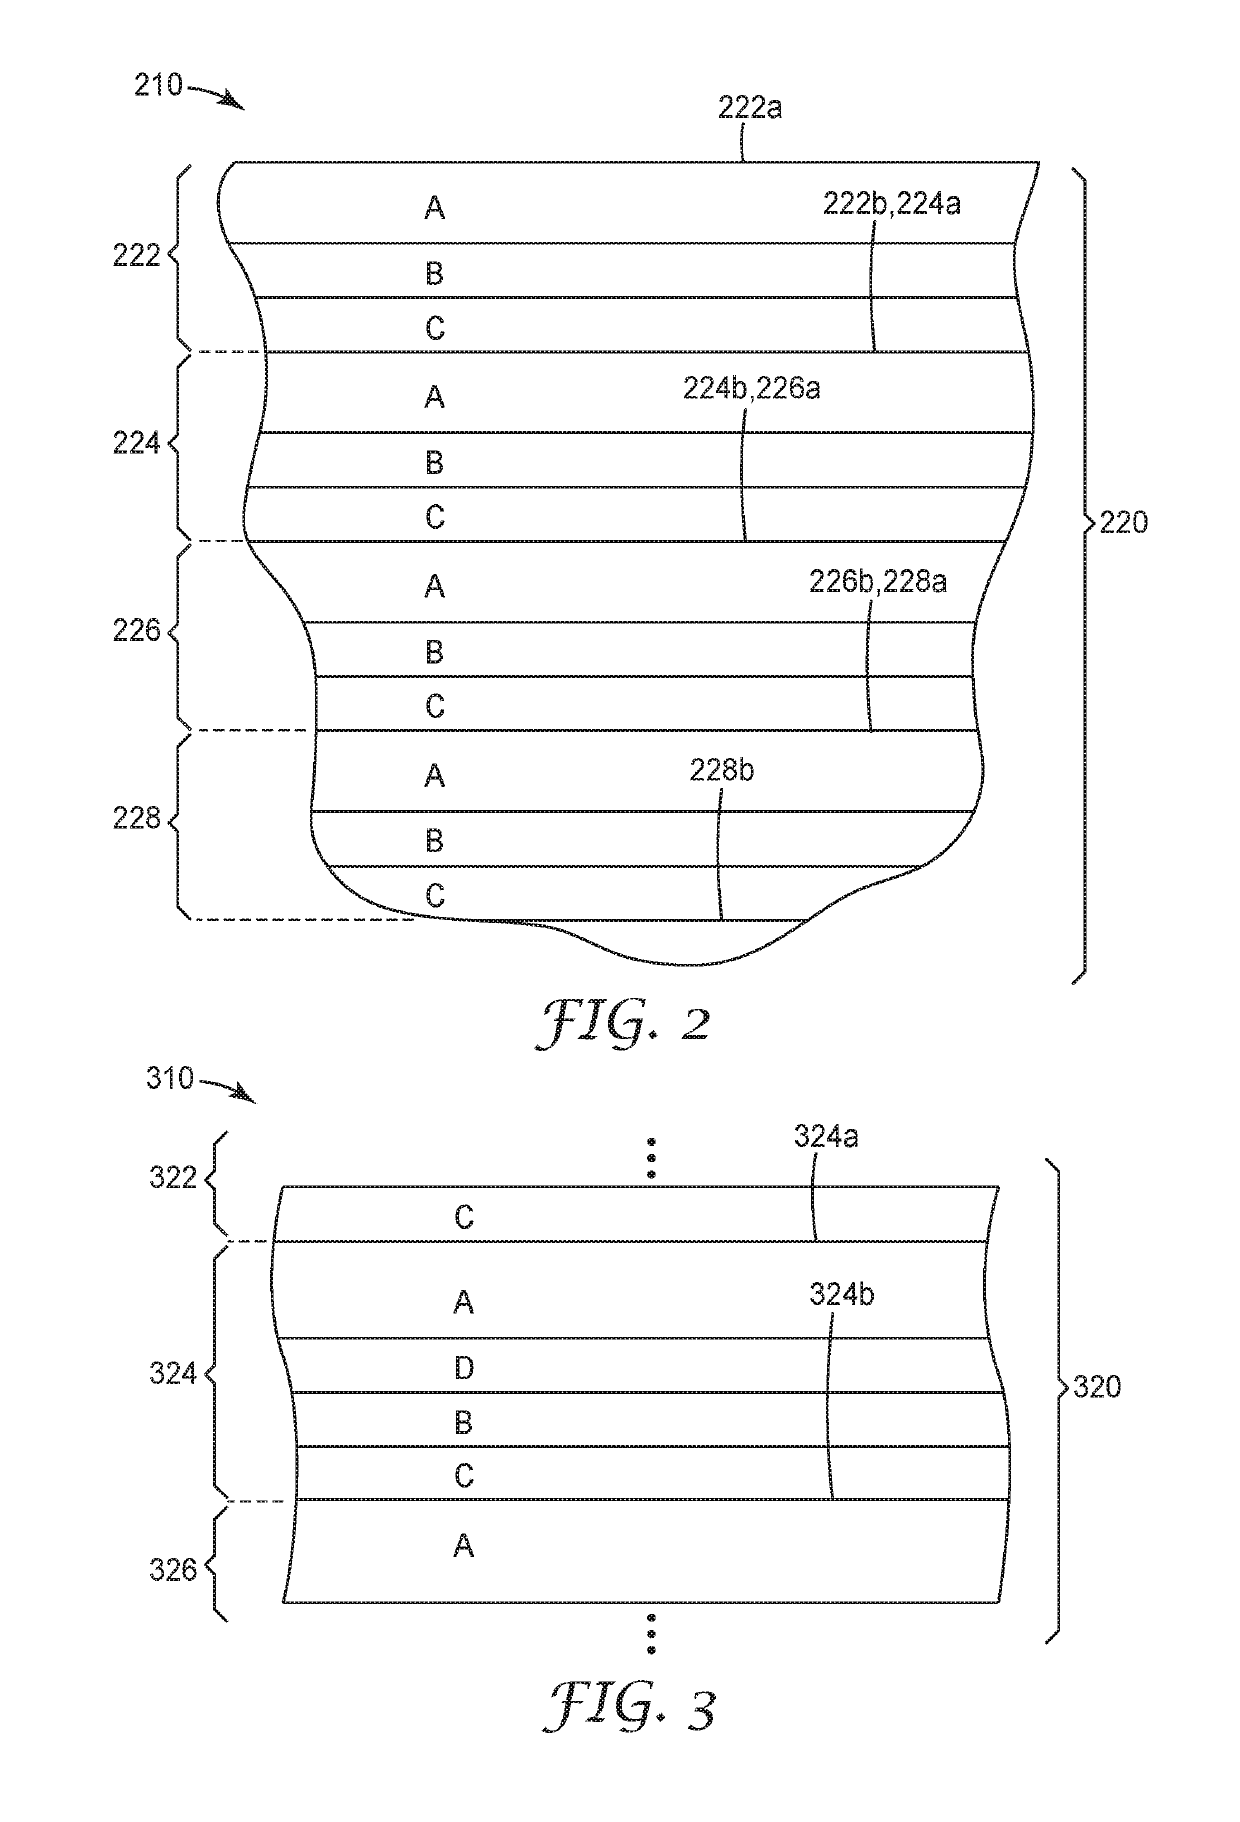 Coextruded polymer film configured for successive irreversible delamination